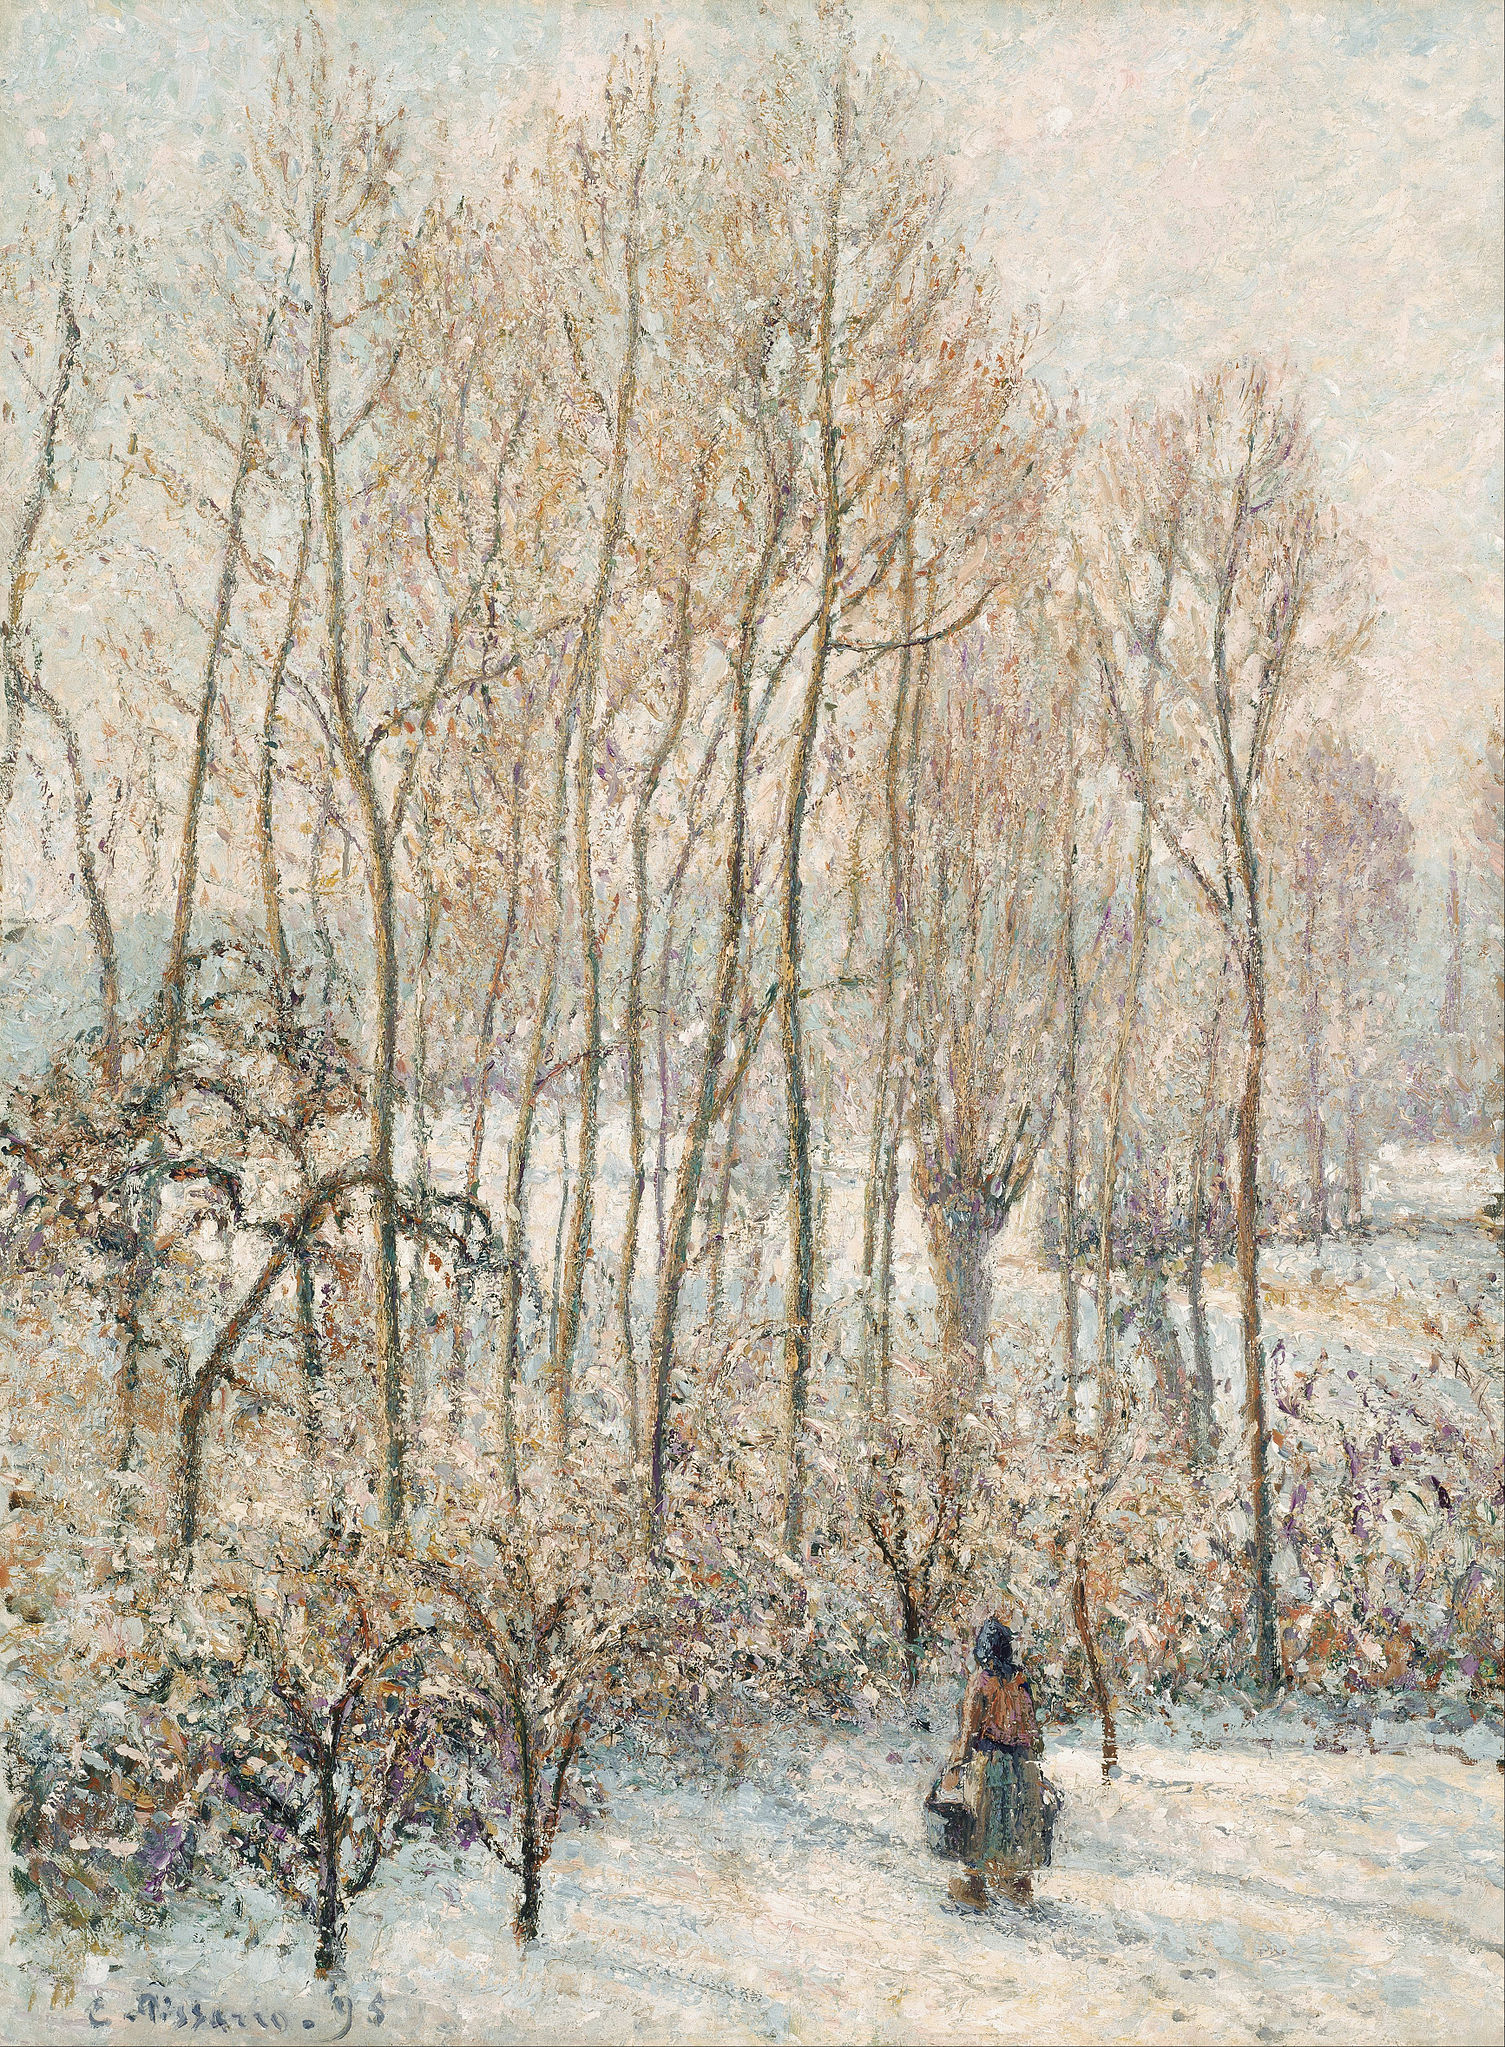 Morning Sunlight on the Snow, Éragny-sur-Epte by Camille Pissarro - 1895 - 82.3 x 61.6 cm Museum of Fine Arts Boston